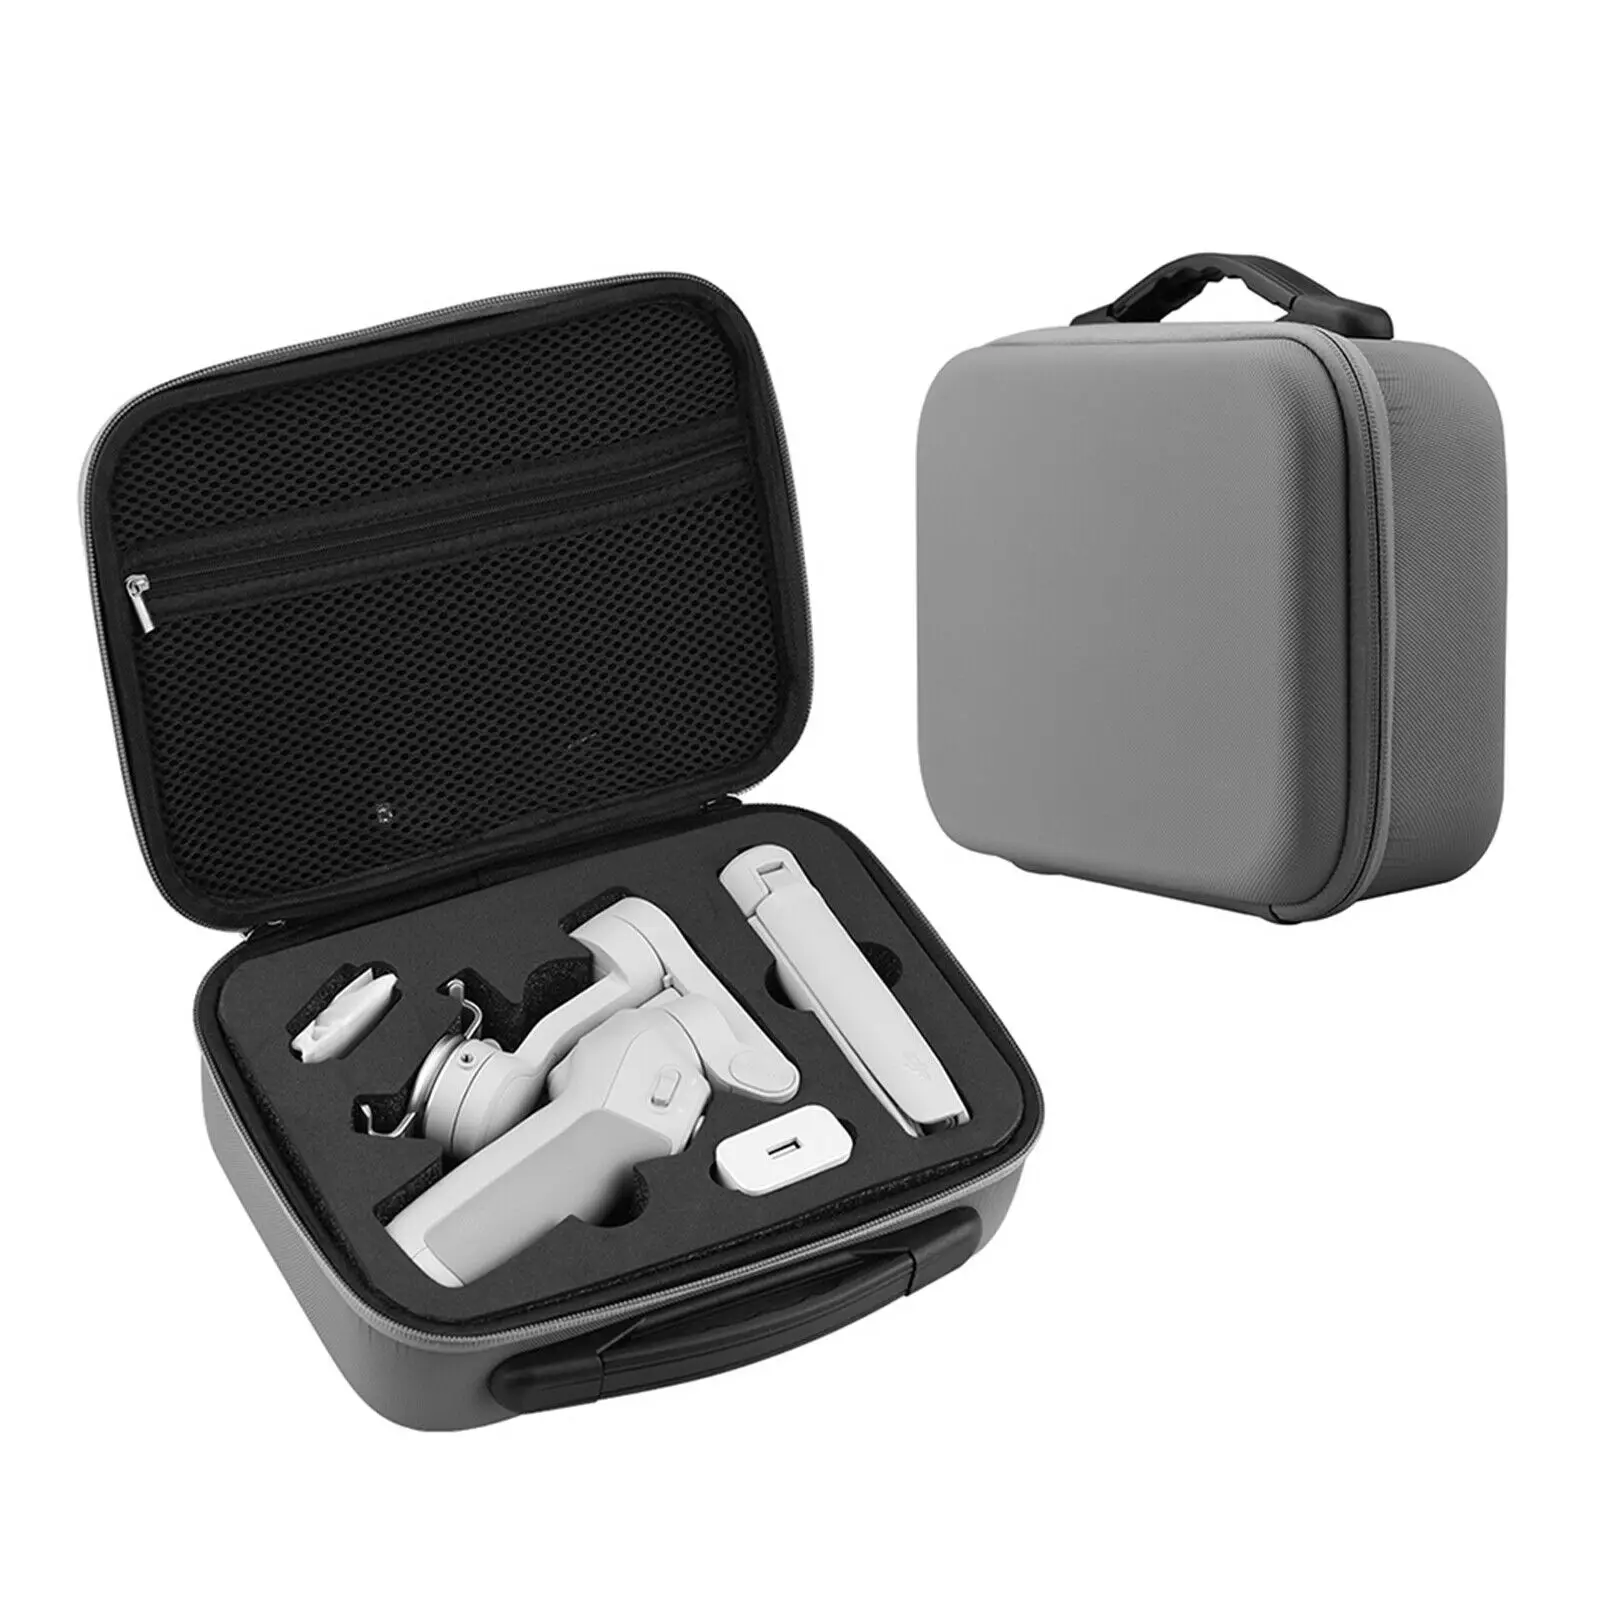 

Storage Case For DJI OM 4 Osmo Mobile 3 Gimbal Stabilizer Accessories Protable Dust-proof Carrying Case Handbag Hard Box Shell